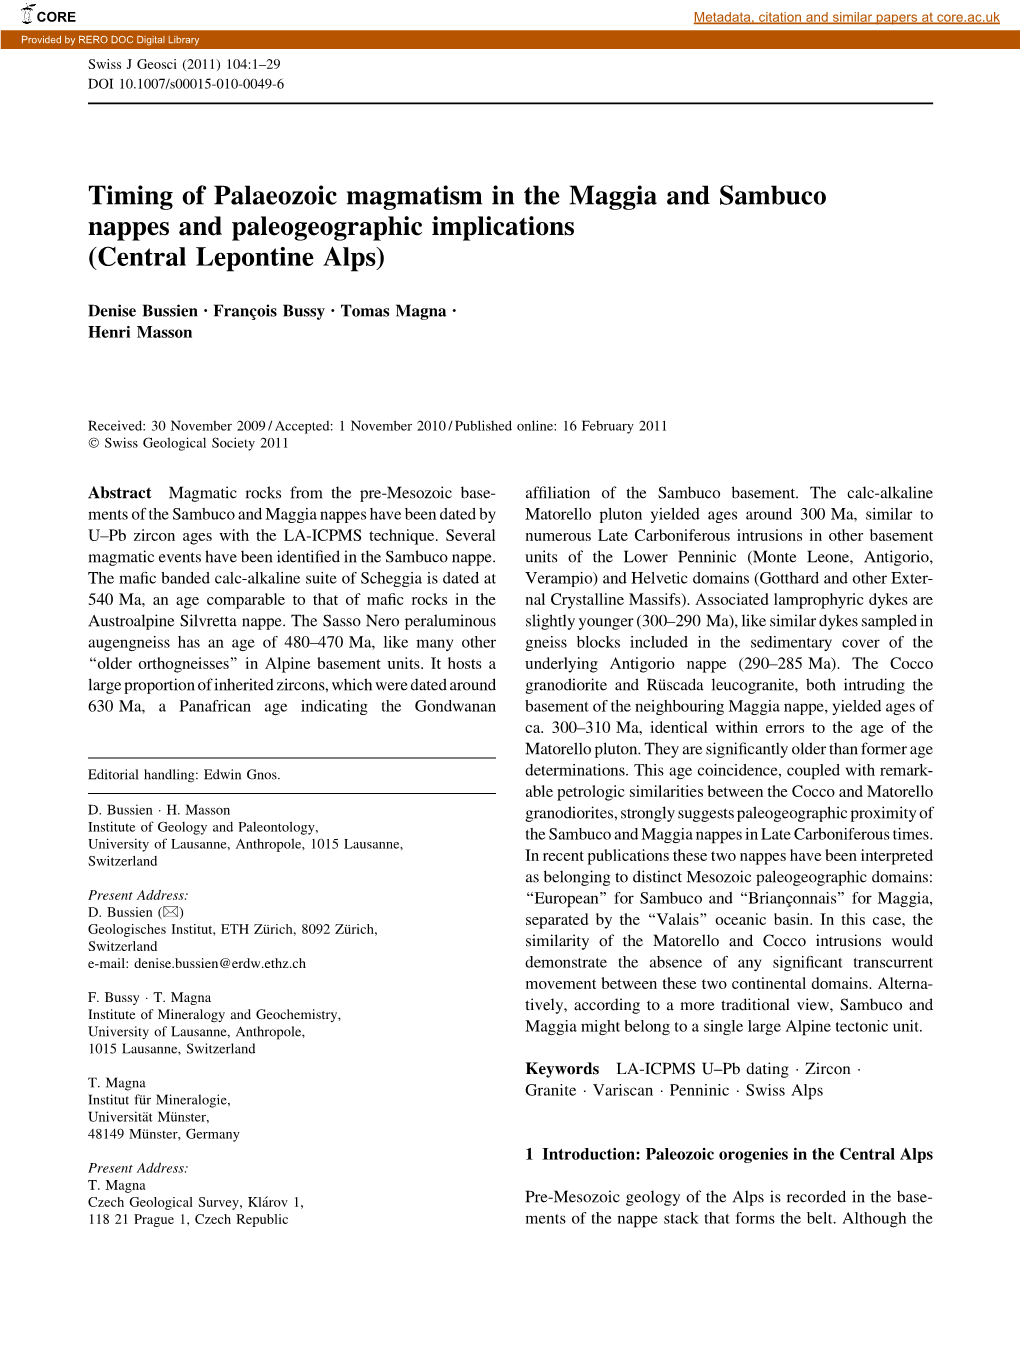 Timing of Palaeozoic Magmatism in the Maggia and Sambuco Nappes and Paleogeographic Implications (Central Lepontine Alps)